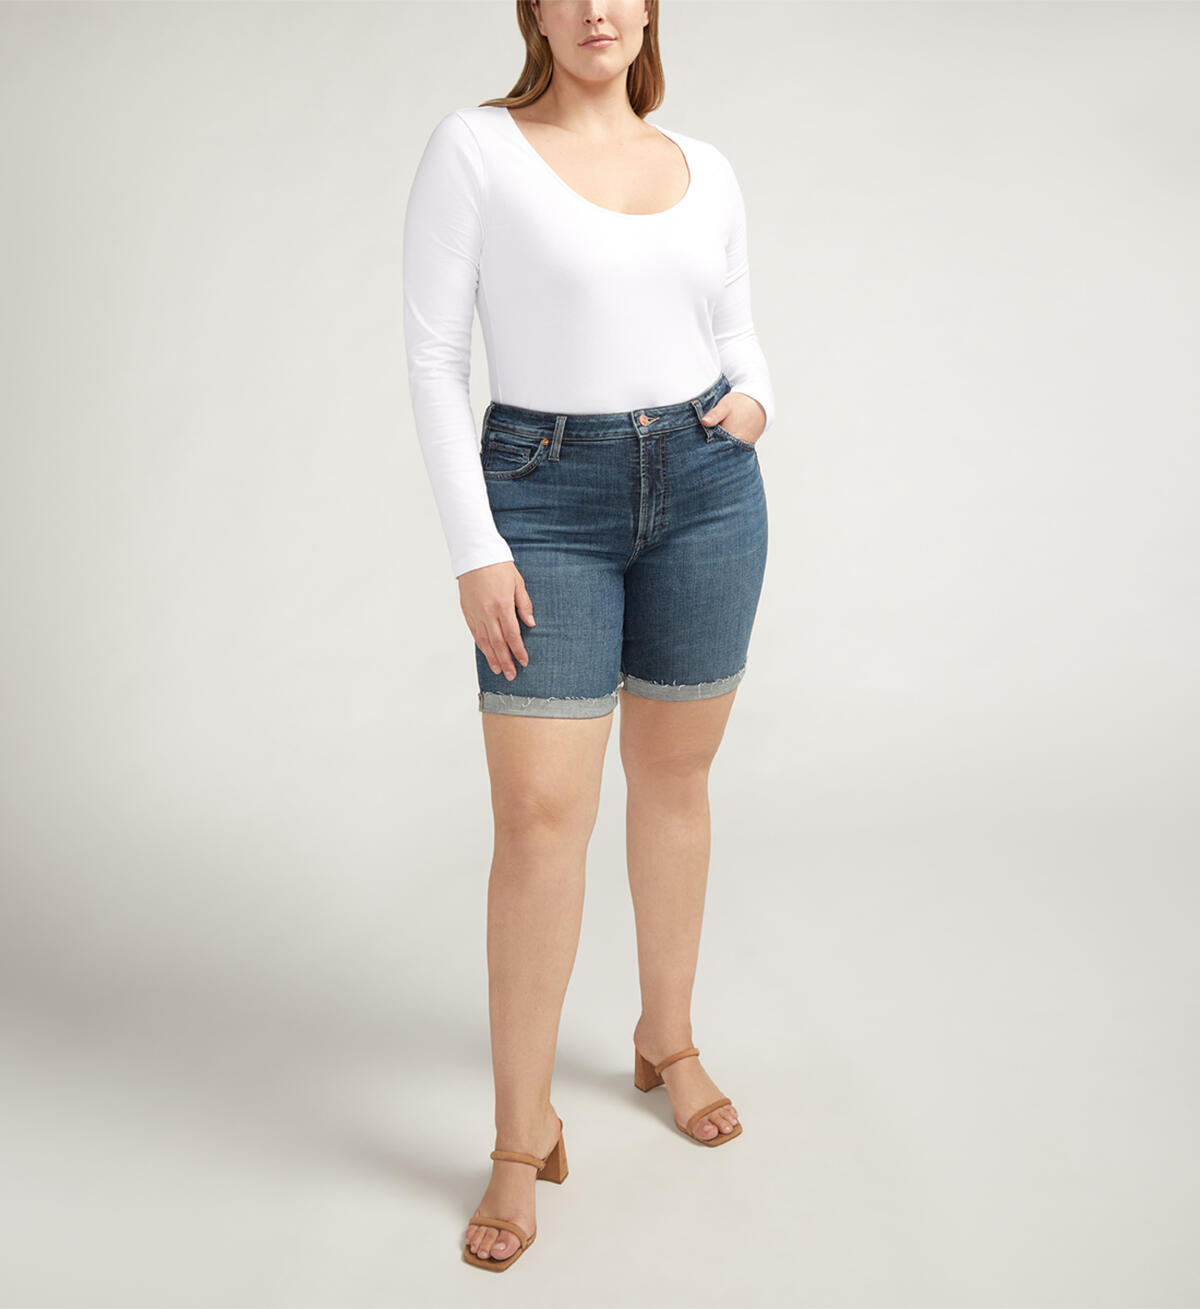 Sure Thing Long Shorts Plus Size, , hi-res image number 0